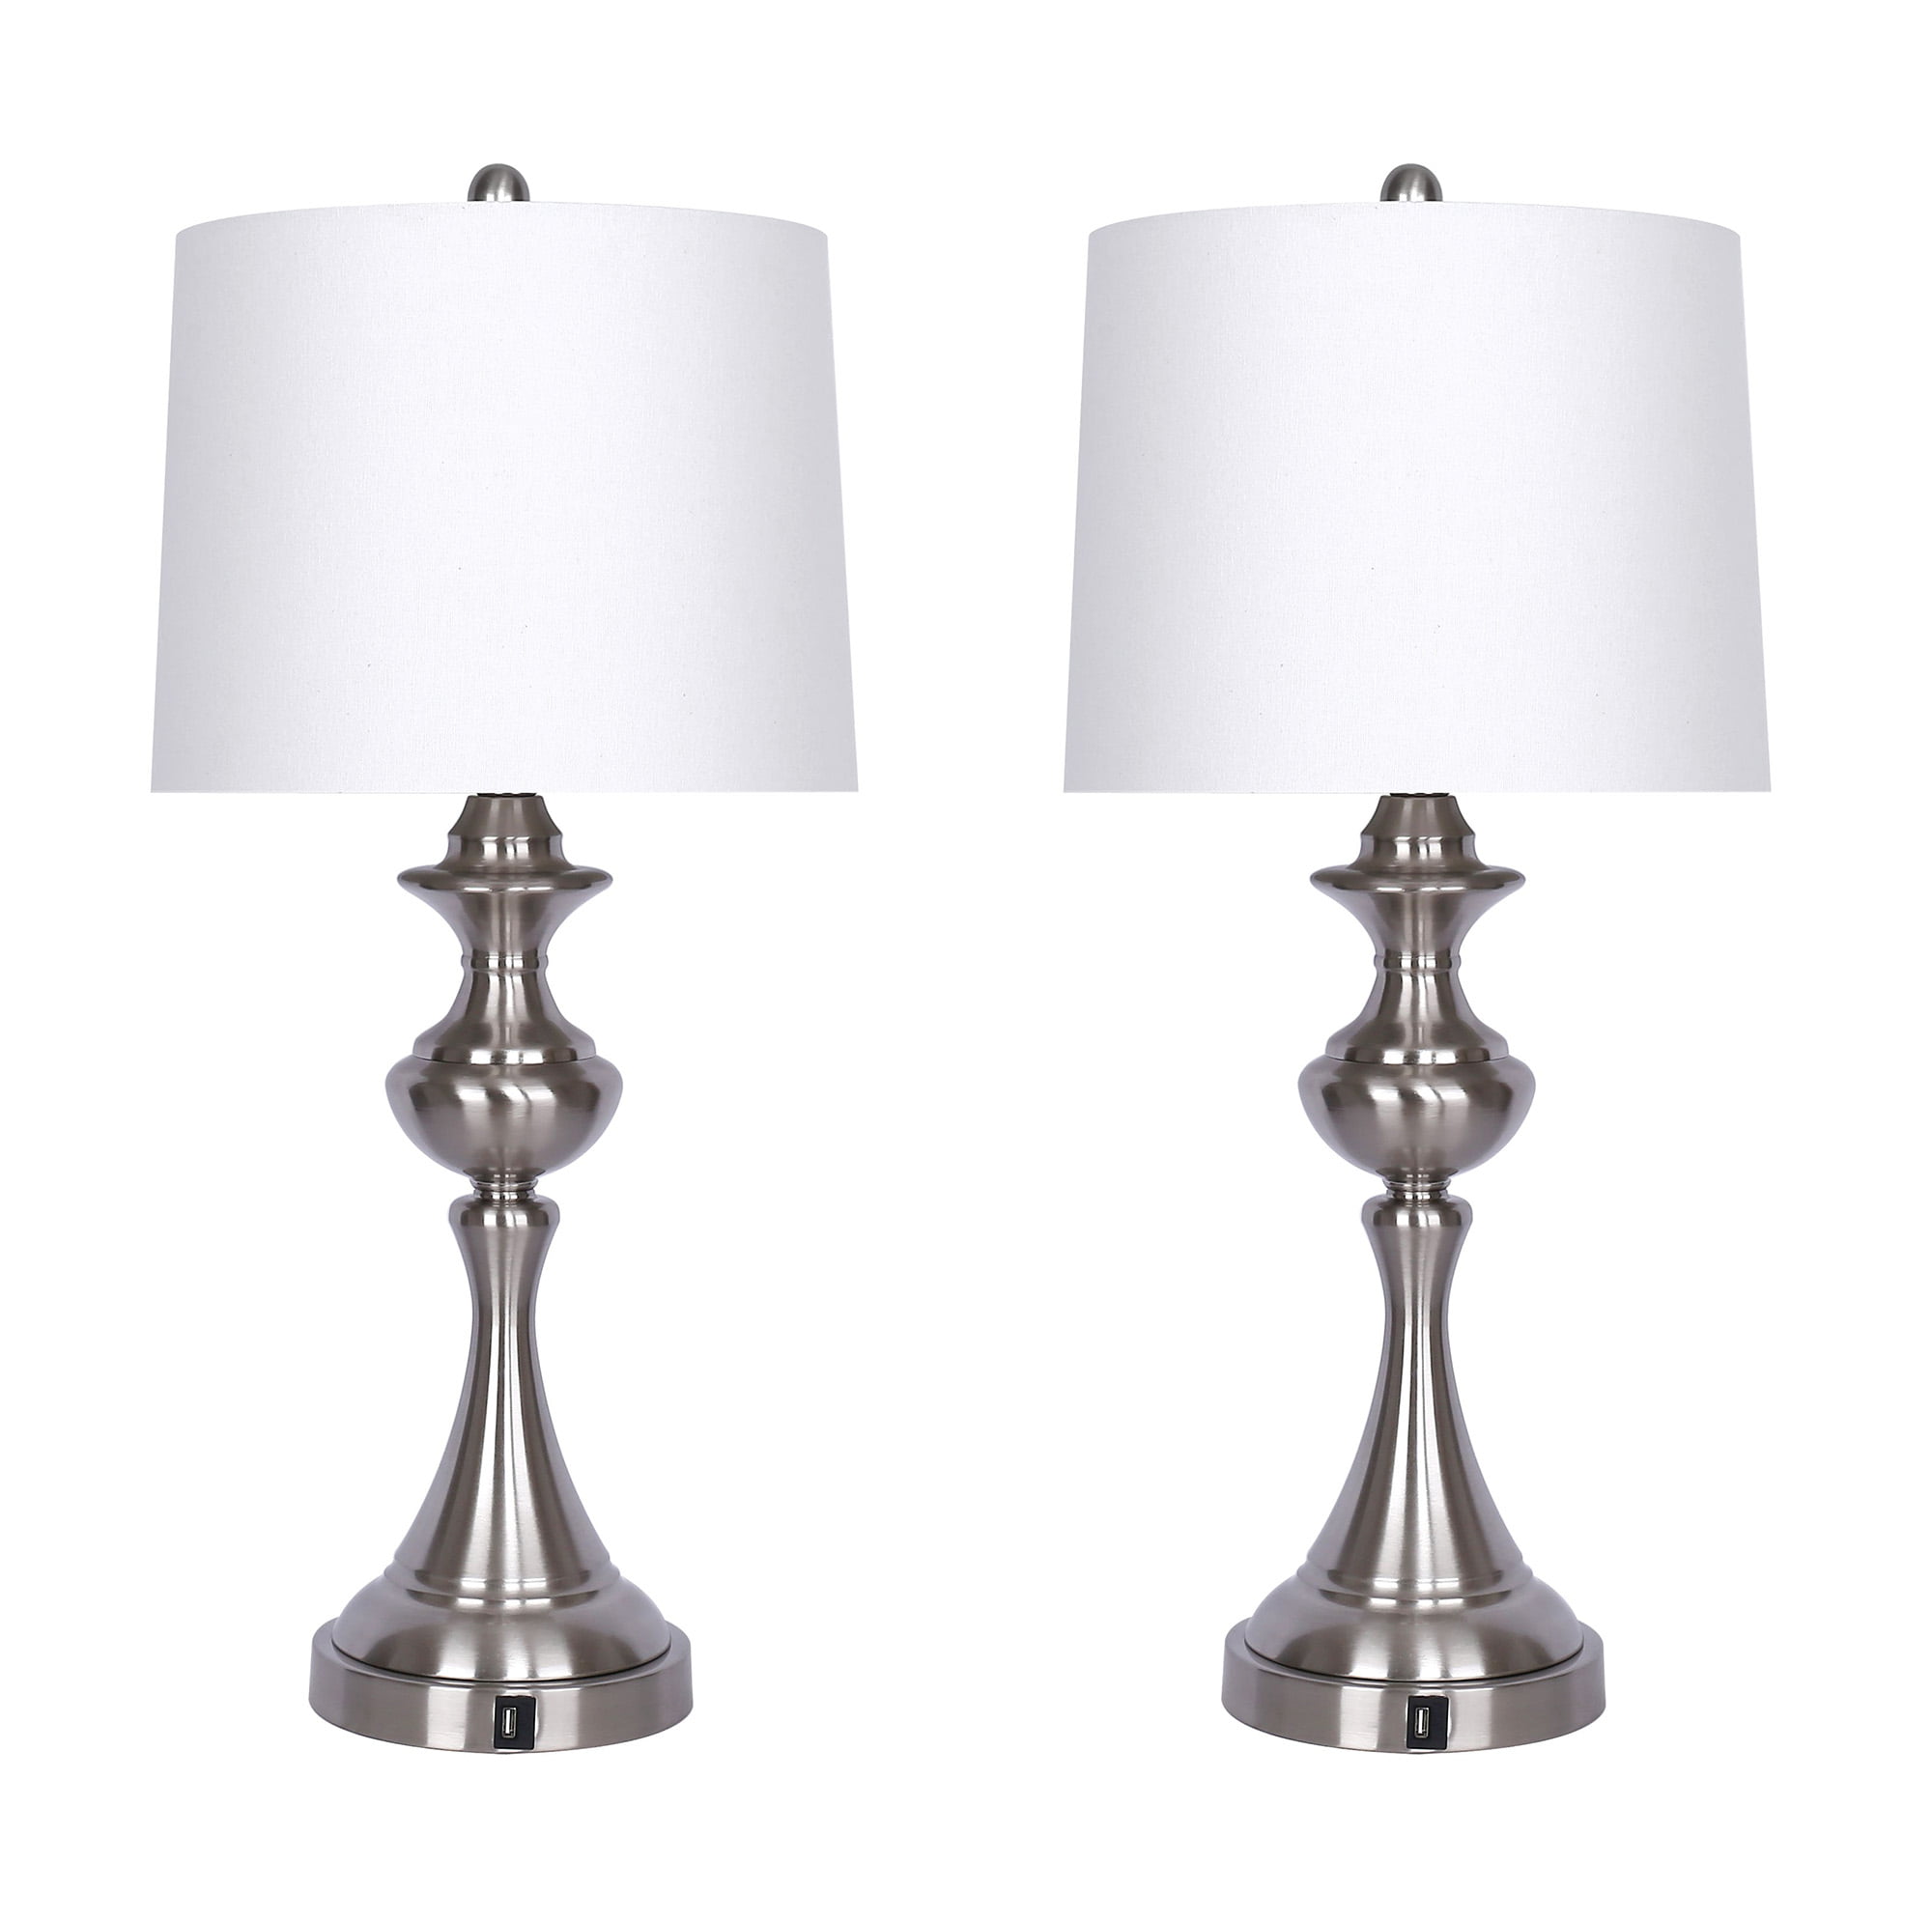 Brushed Nickel 28 5 Table Lamp Set Of, Brushed Nickel Table Lamps Set Of 2